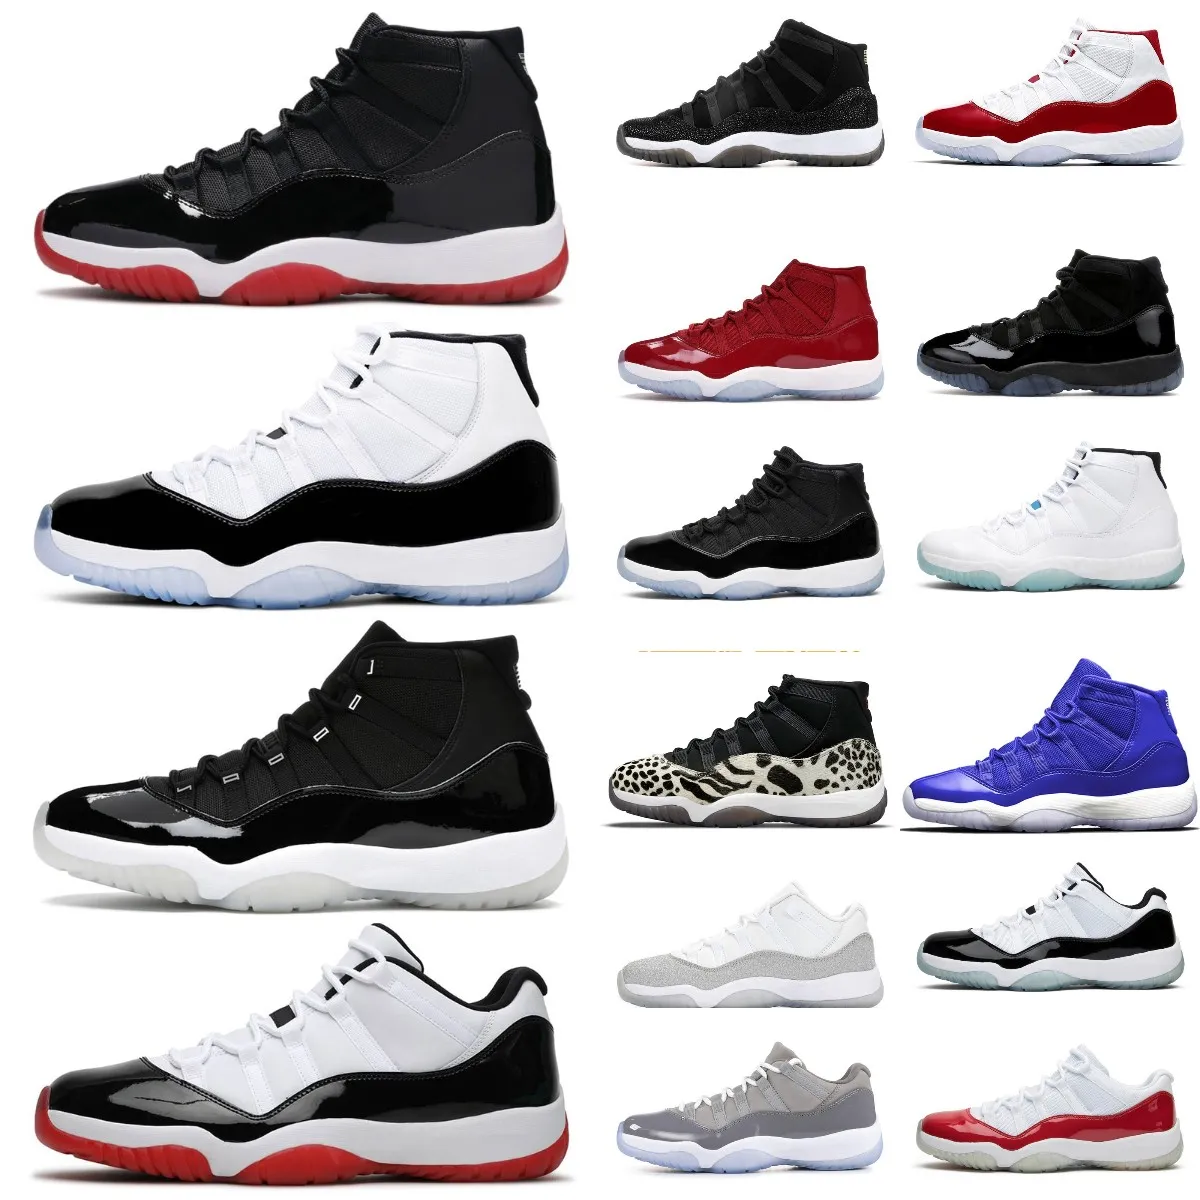 NOWOŚĆ 11 11S BUTS BUZ BOCKALL MAN WOMEN Sneakers Space Jam Cap and Gown High Concord Platinum Tint Barons Legend Blue 25th Anniversary Low White Cherry Treners